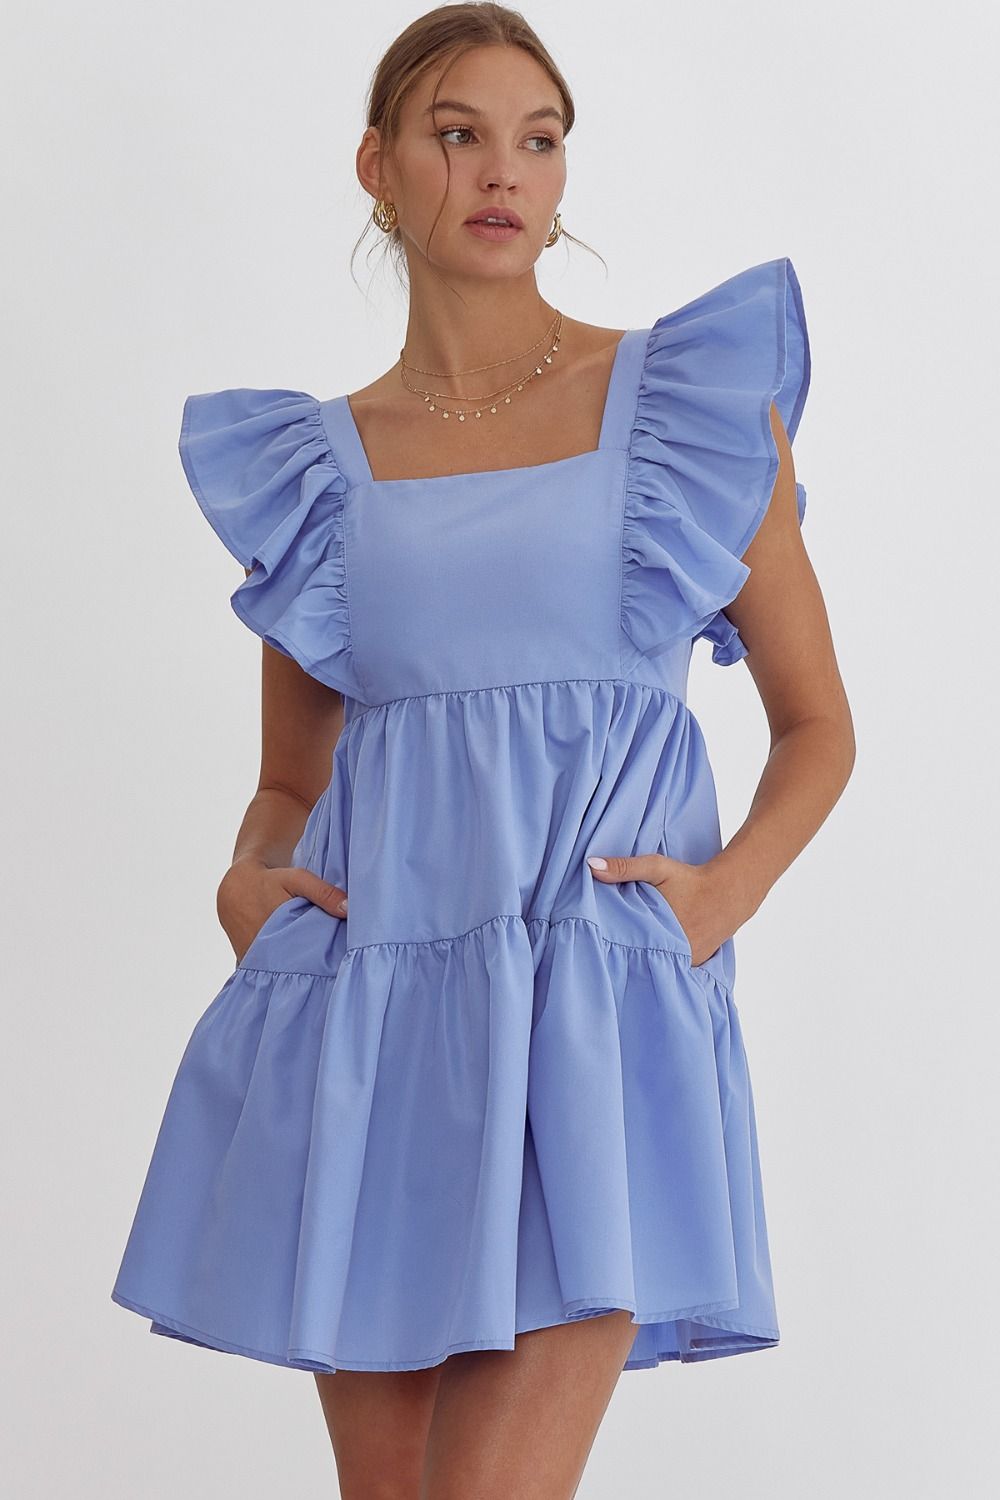 Entro square neck baby doll dress